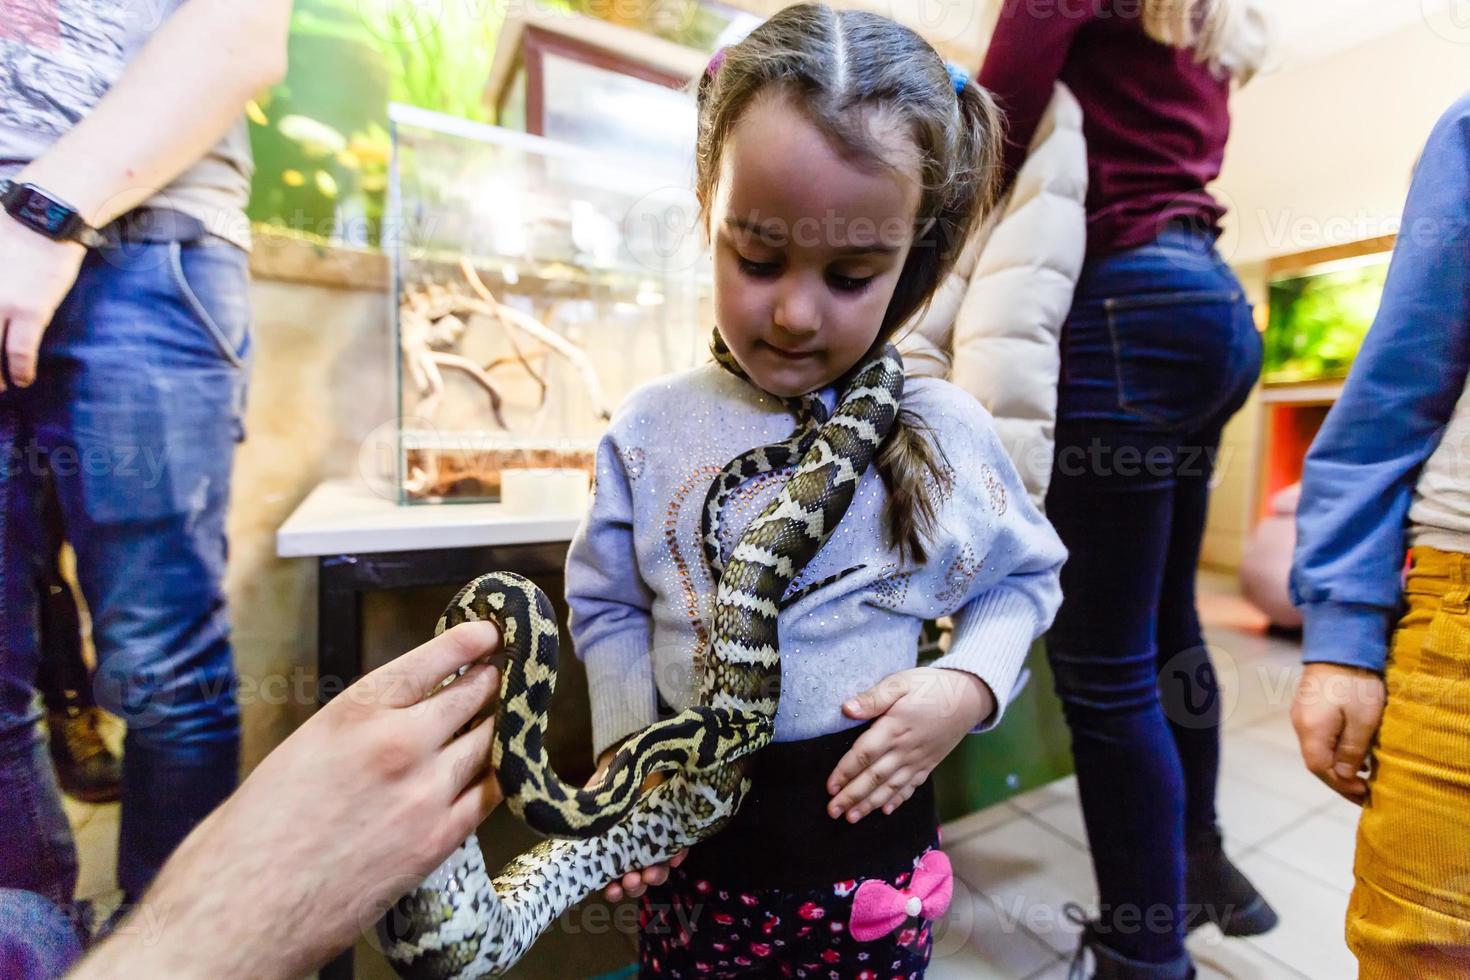 Zoo volunteer showing a snake to a child and letting her touch the snake photo